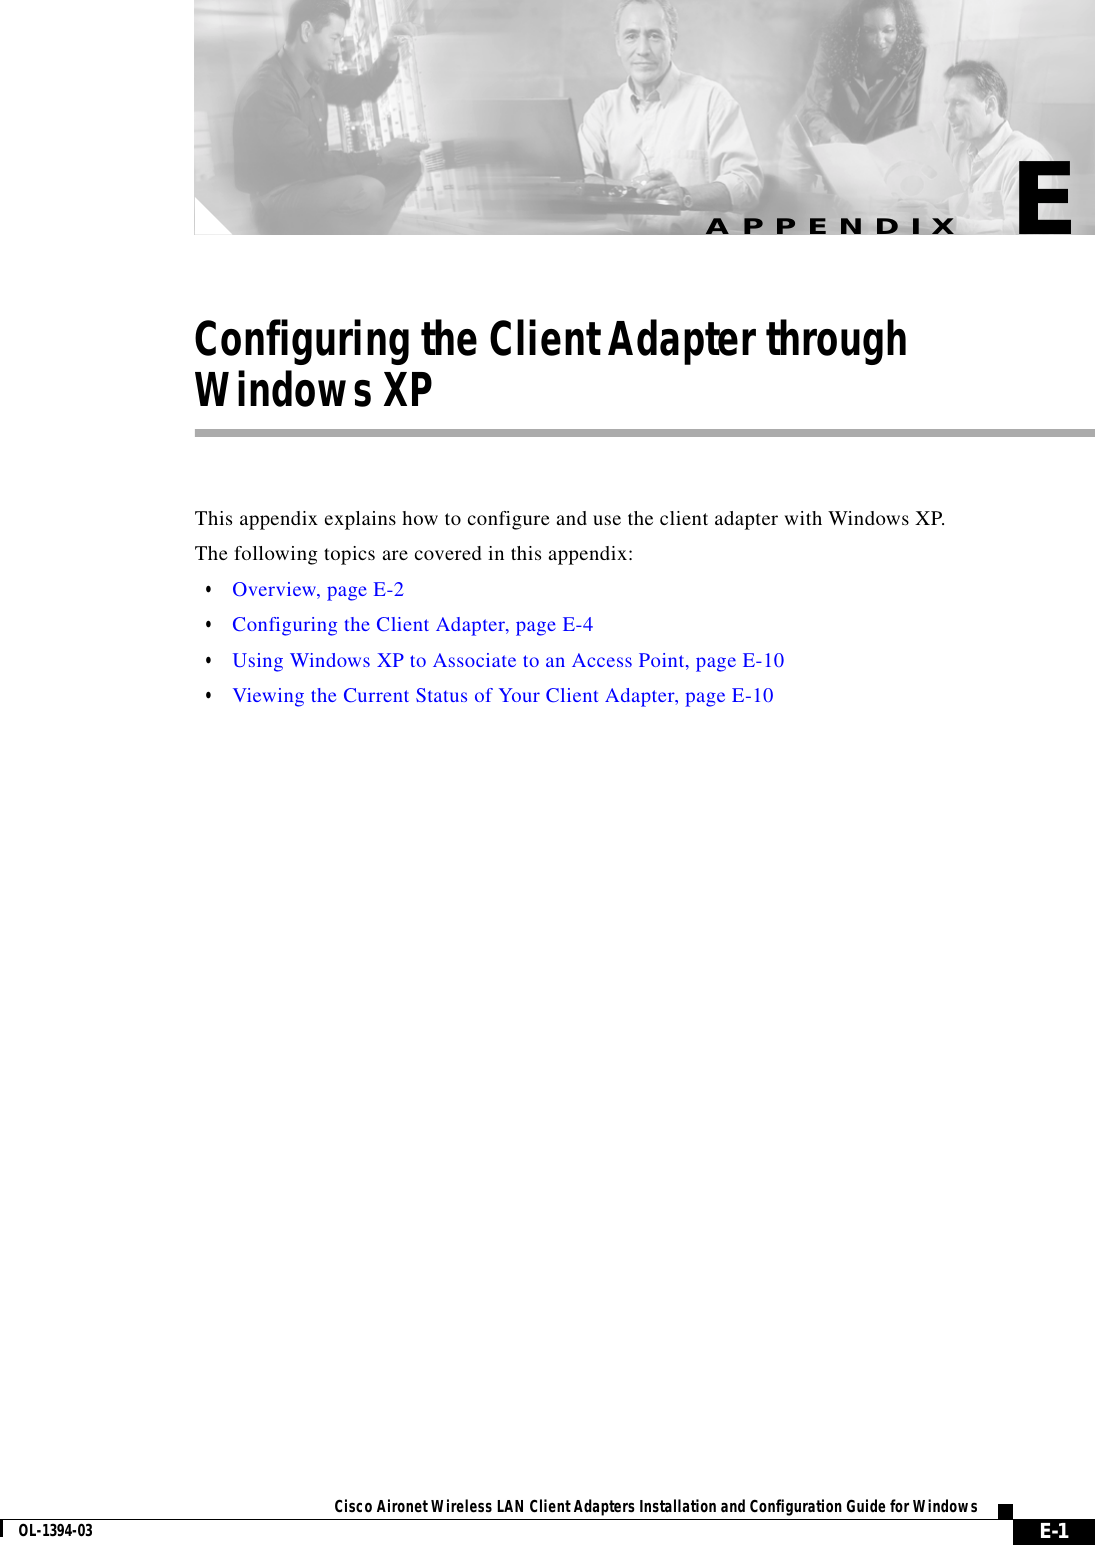 E-1Cisco Aironet Wireless LAN Client Adapters Installation and Configuration Guide for WindowsOL-1394-03APPENDIXEConfiguring the Client Adapter throughWindows XPThis appendix explains how to configure and use the client adapter with Windows XP.The following topics are covered in this appendix:•Overview, page E-2•Configuring the Client Adapter, page E-4•Using Windows XP to Associate to an Access Point, page E-10•Viewing the Current Status of Your Client Adapter, page E-10